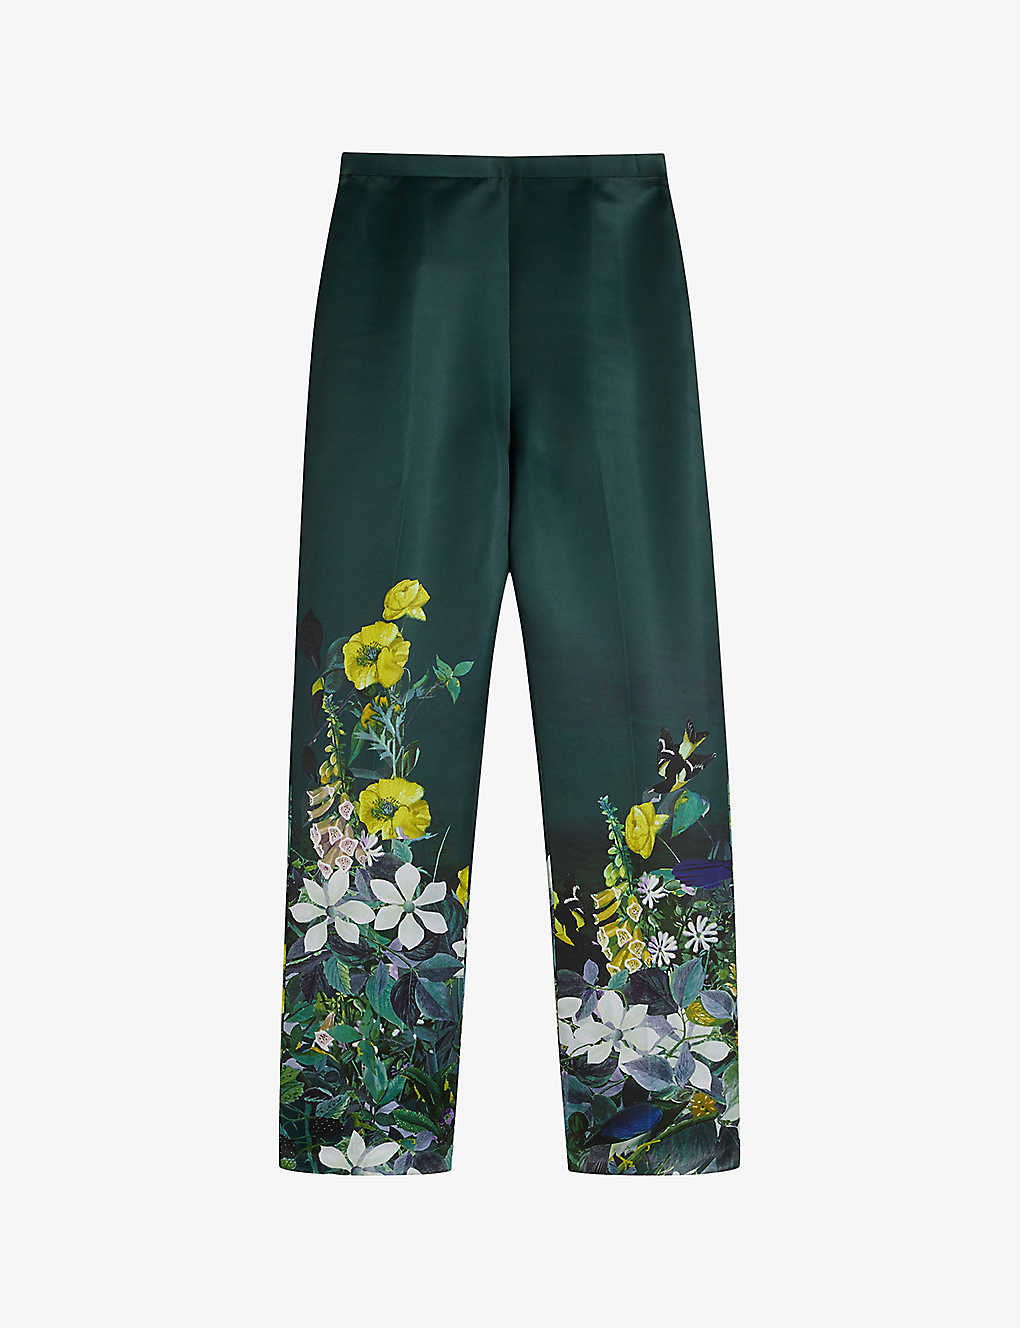 TED BAKER TED BAKER WOMEN'S DK-GREEN AIKAAT FLORAL-PRINT TAPERED-LEG MID-RISE WOVEN TROUSERS,68838738